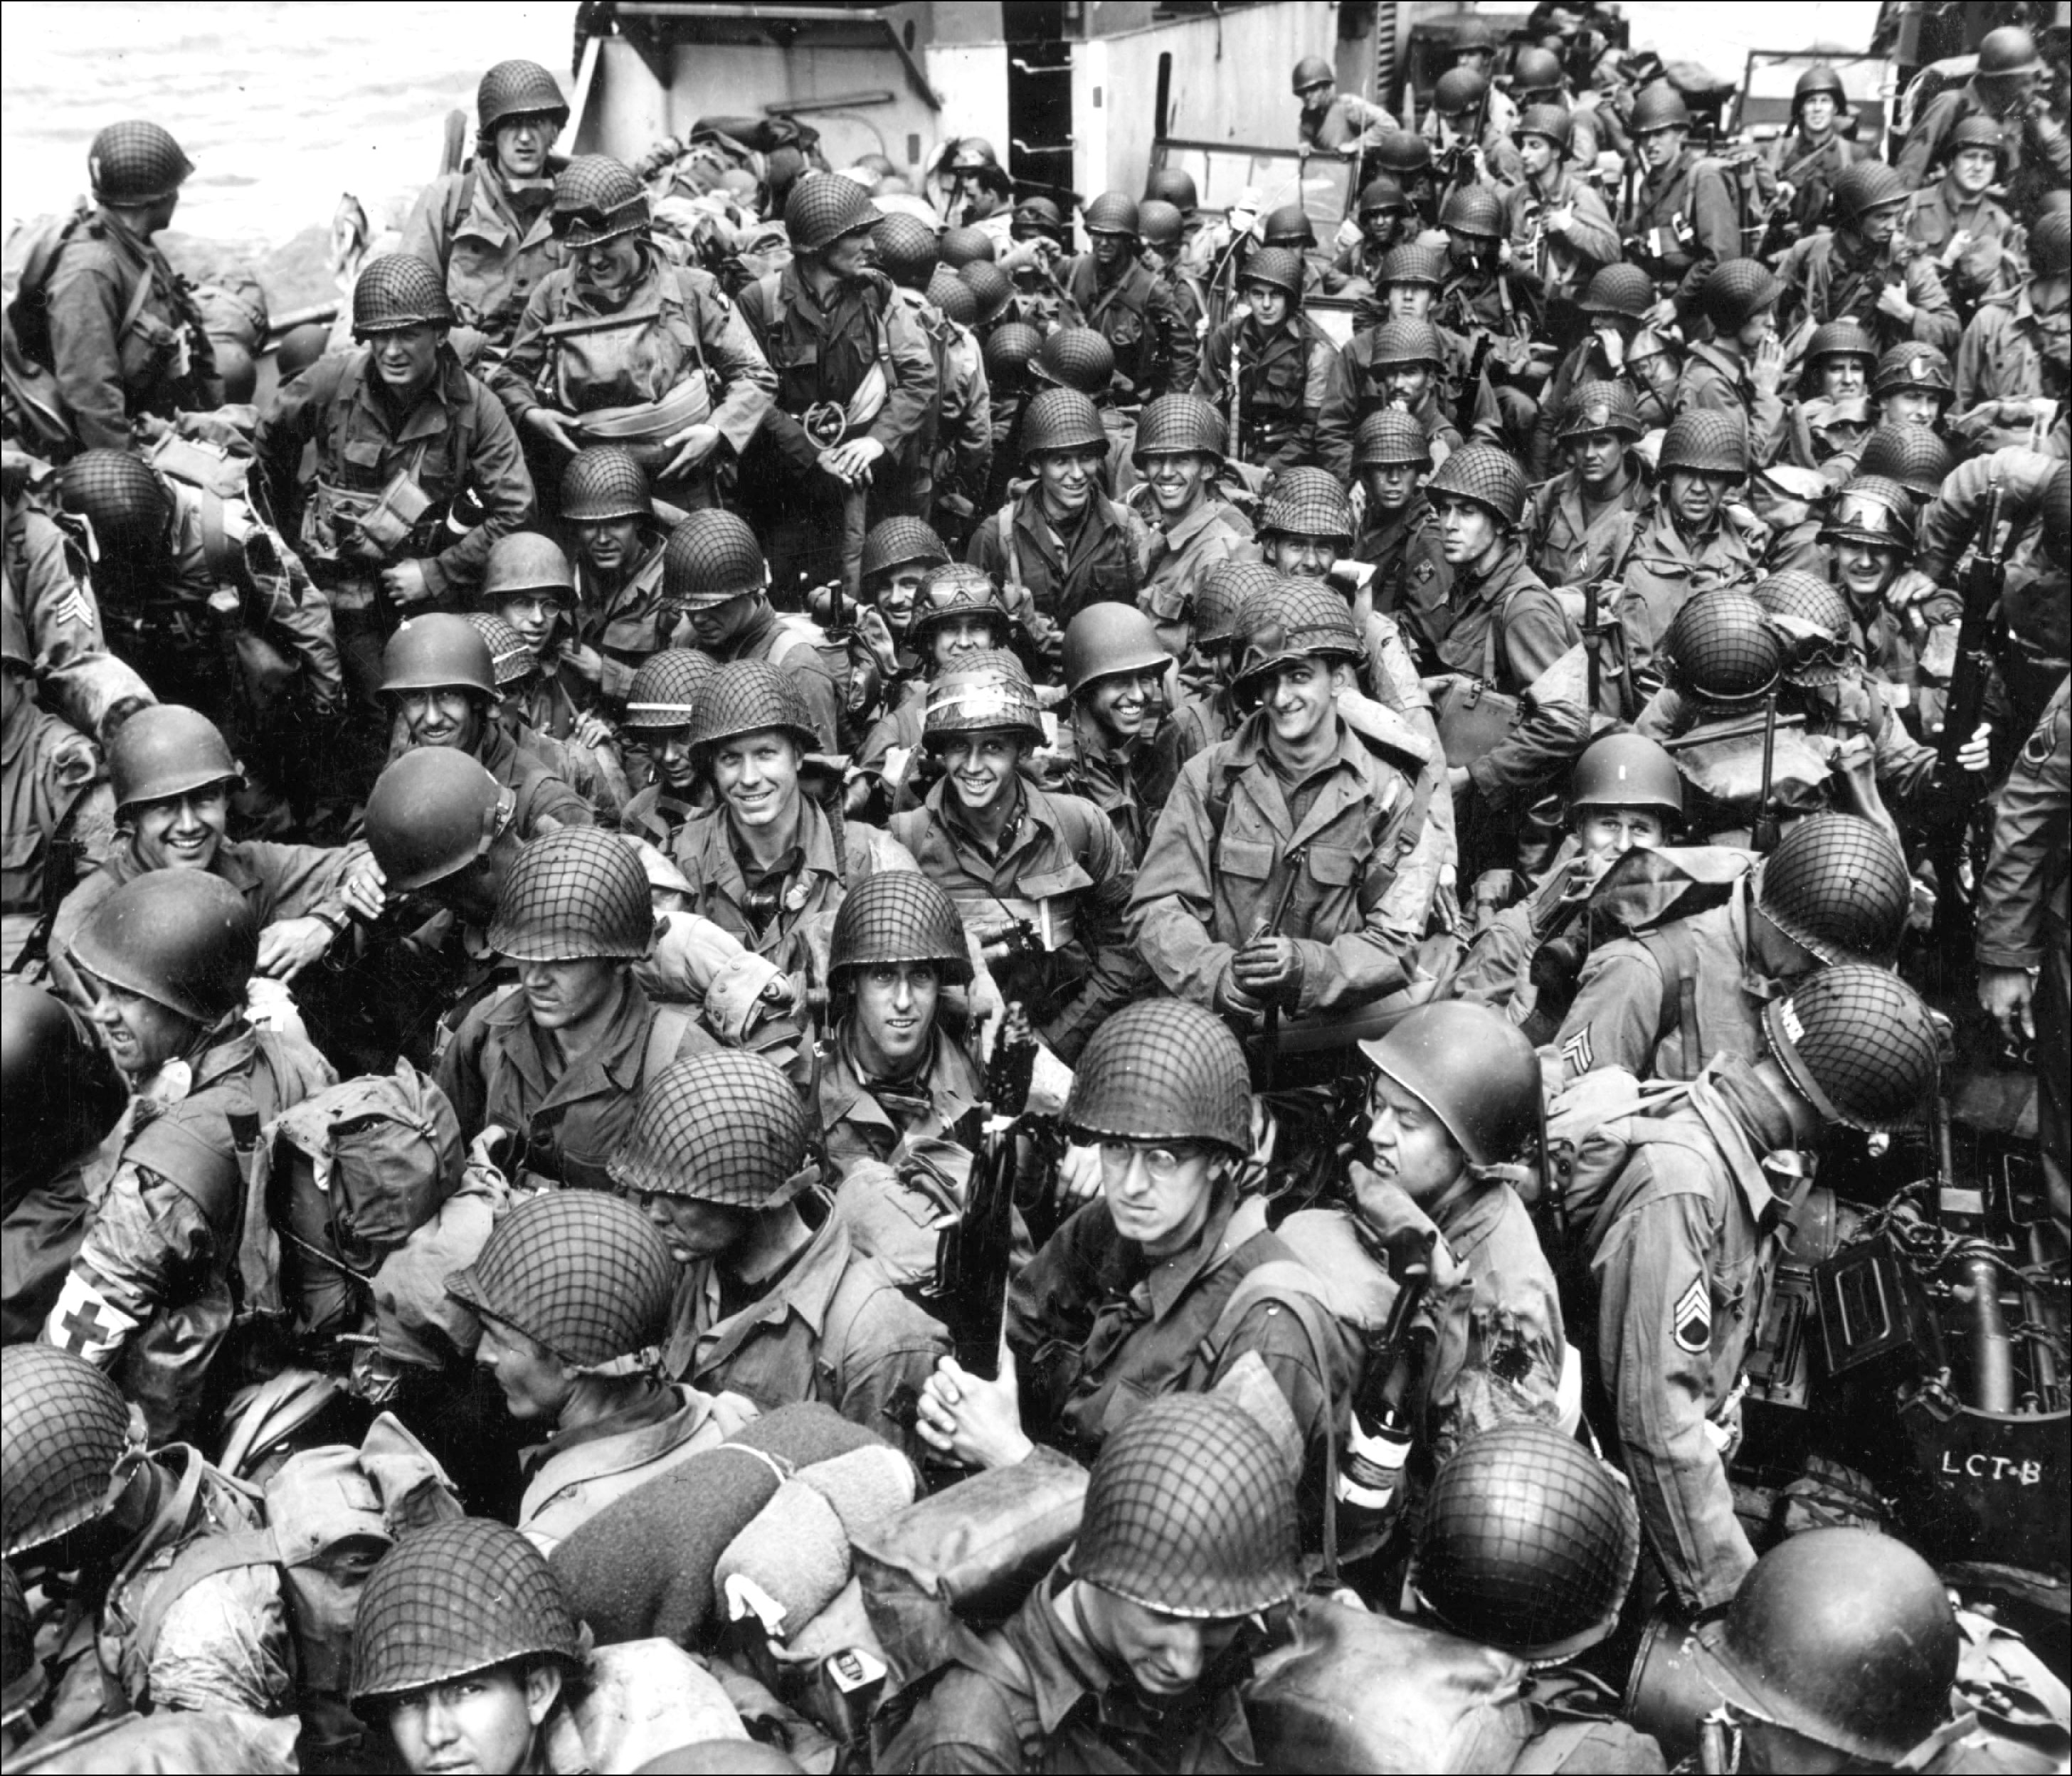 Soldiers packed on a boat during WWII